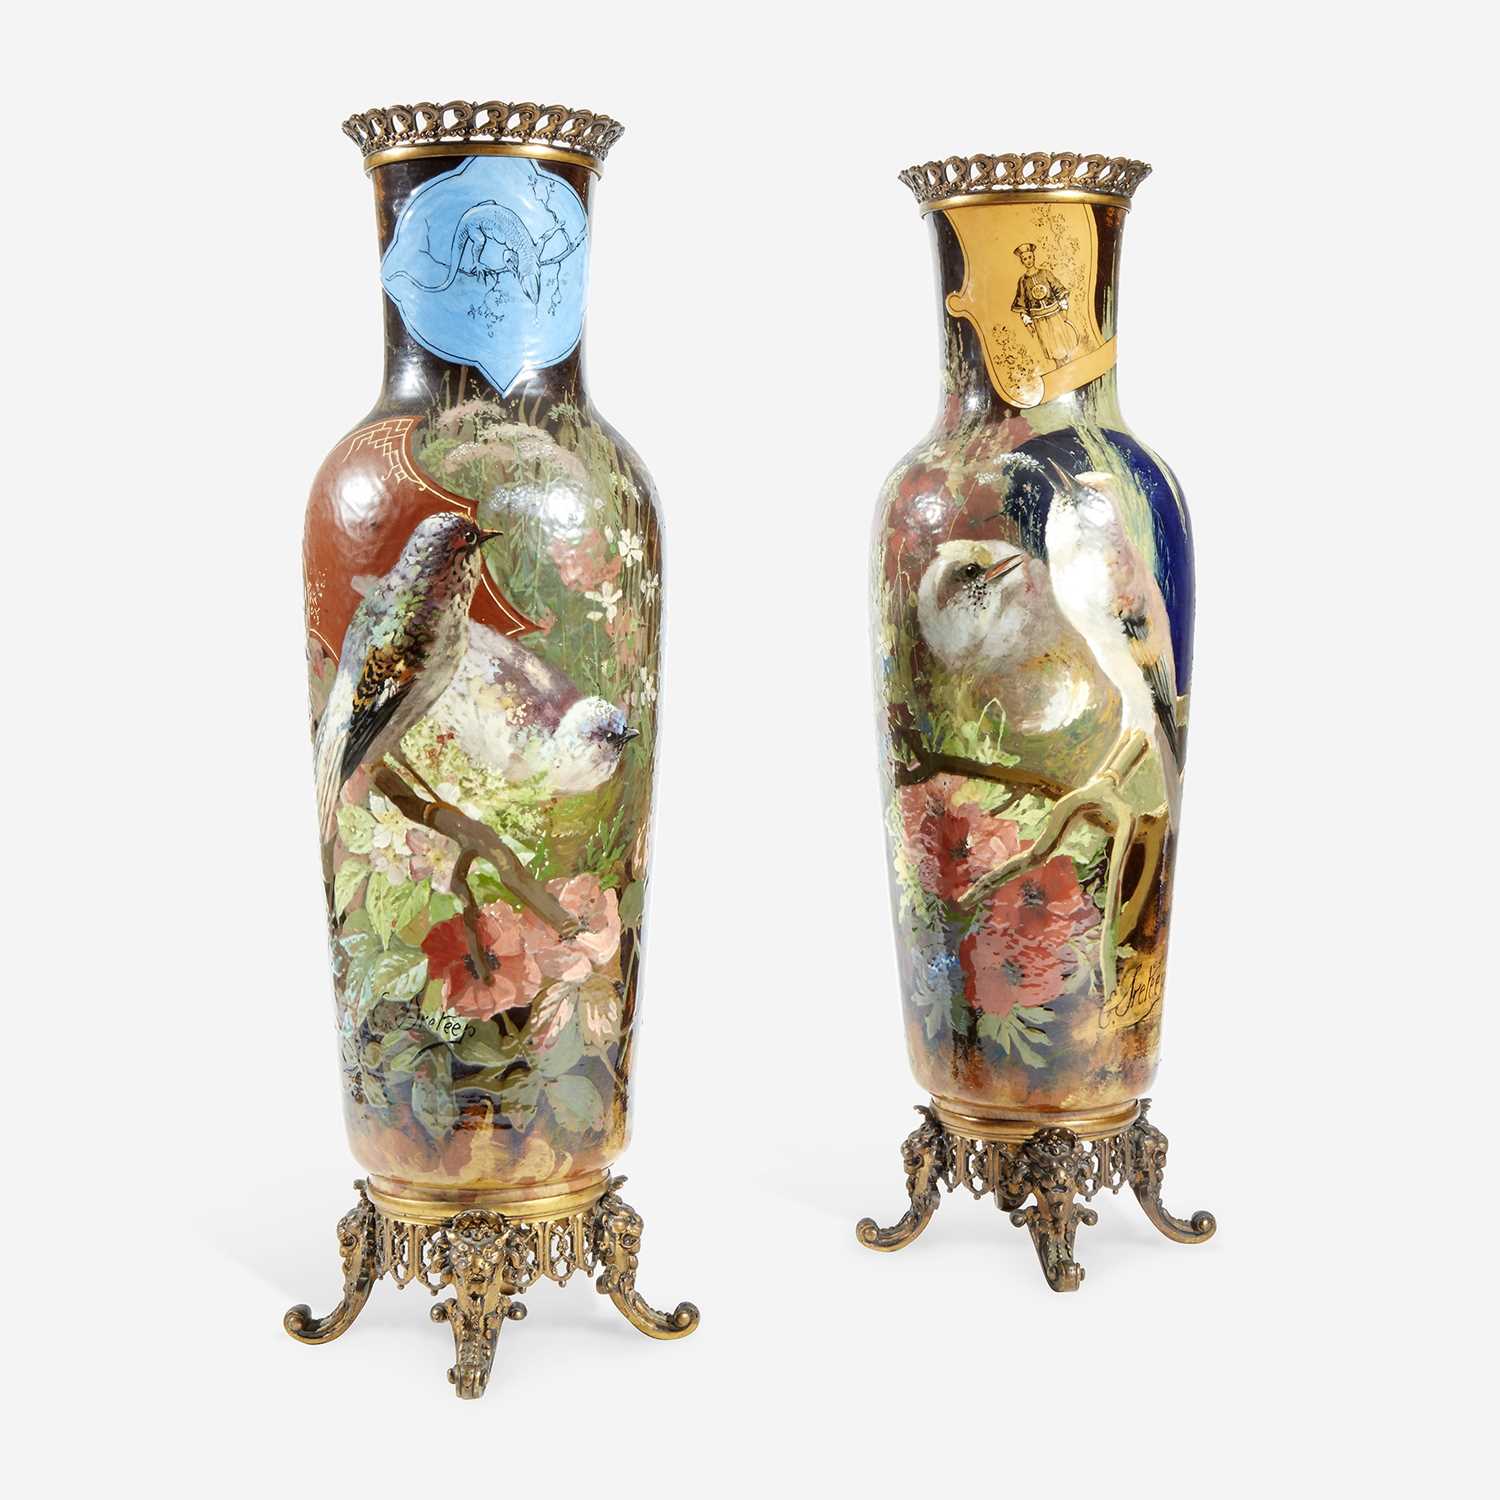 Lot 71 - A Pair of Large French 'Japonisme' Faience and Bronze Mounted Vases